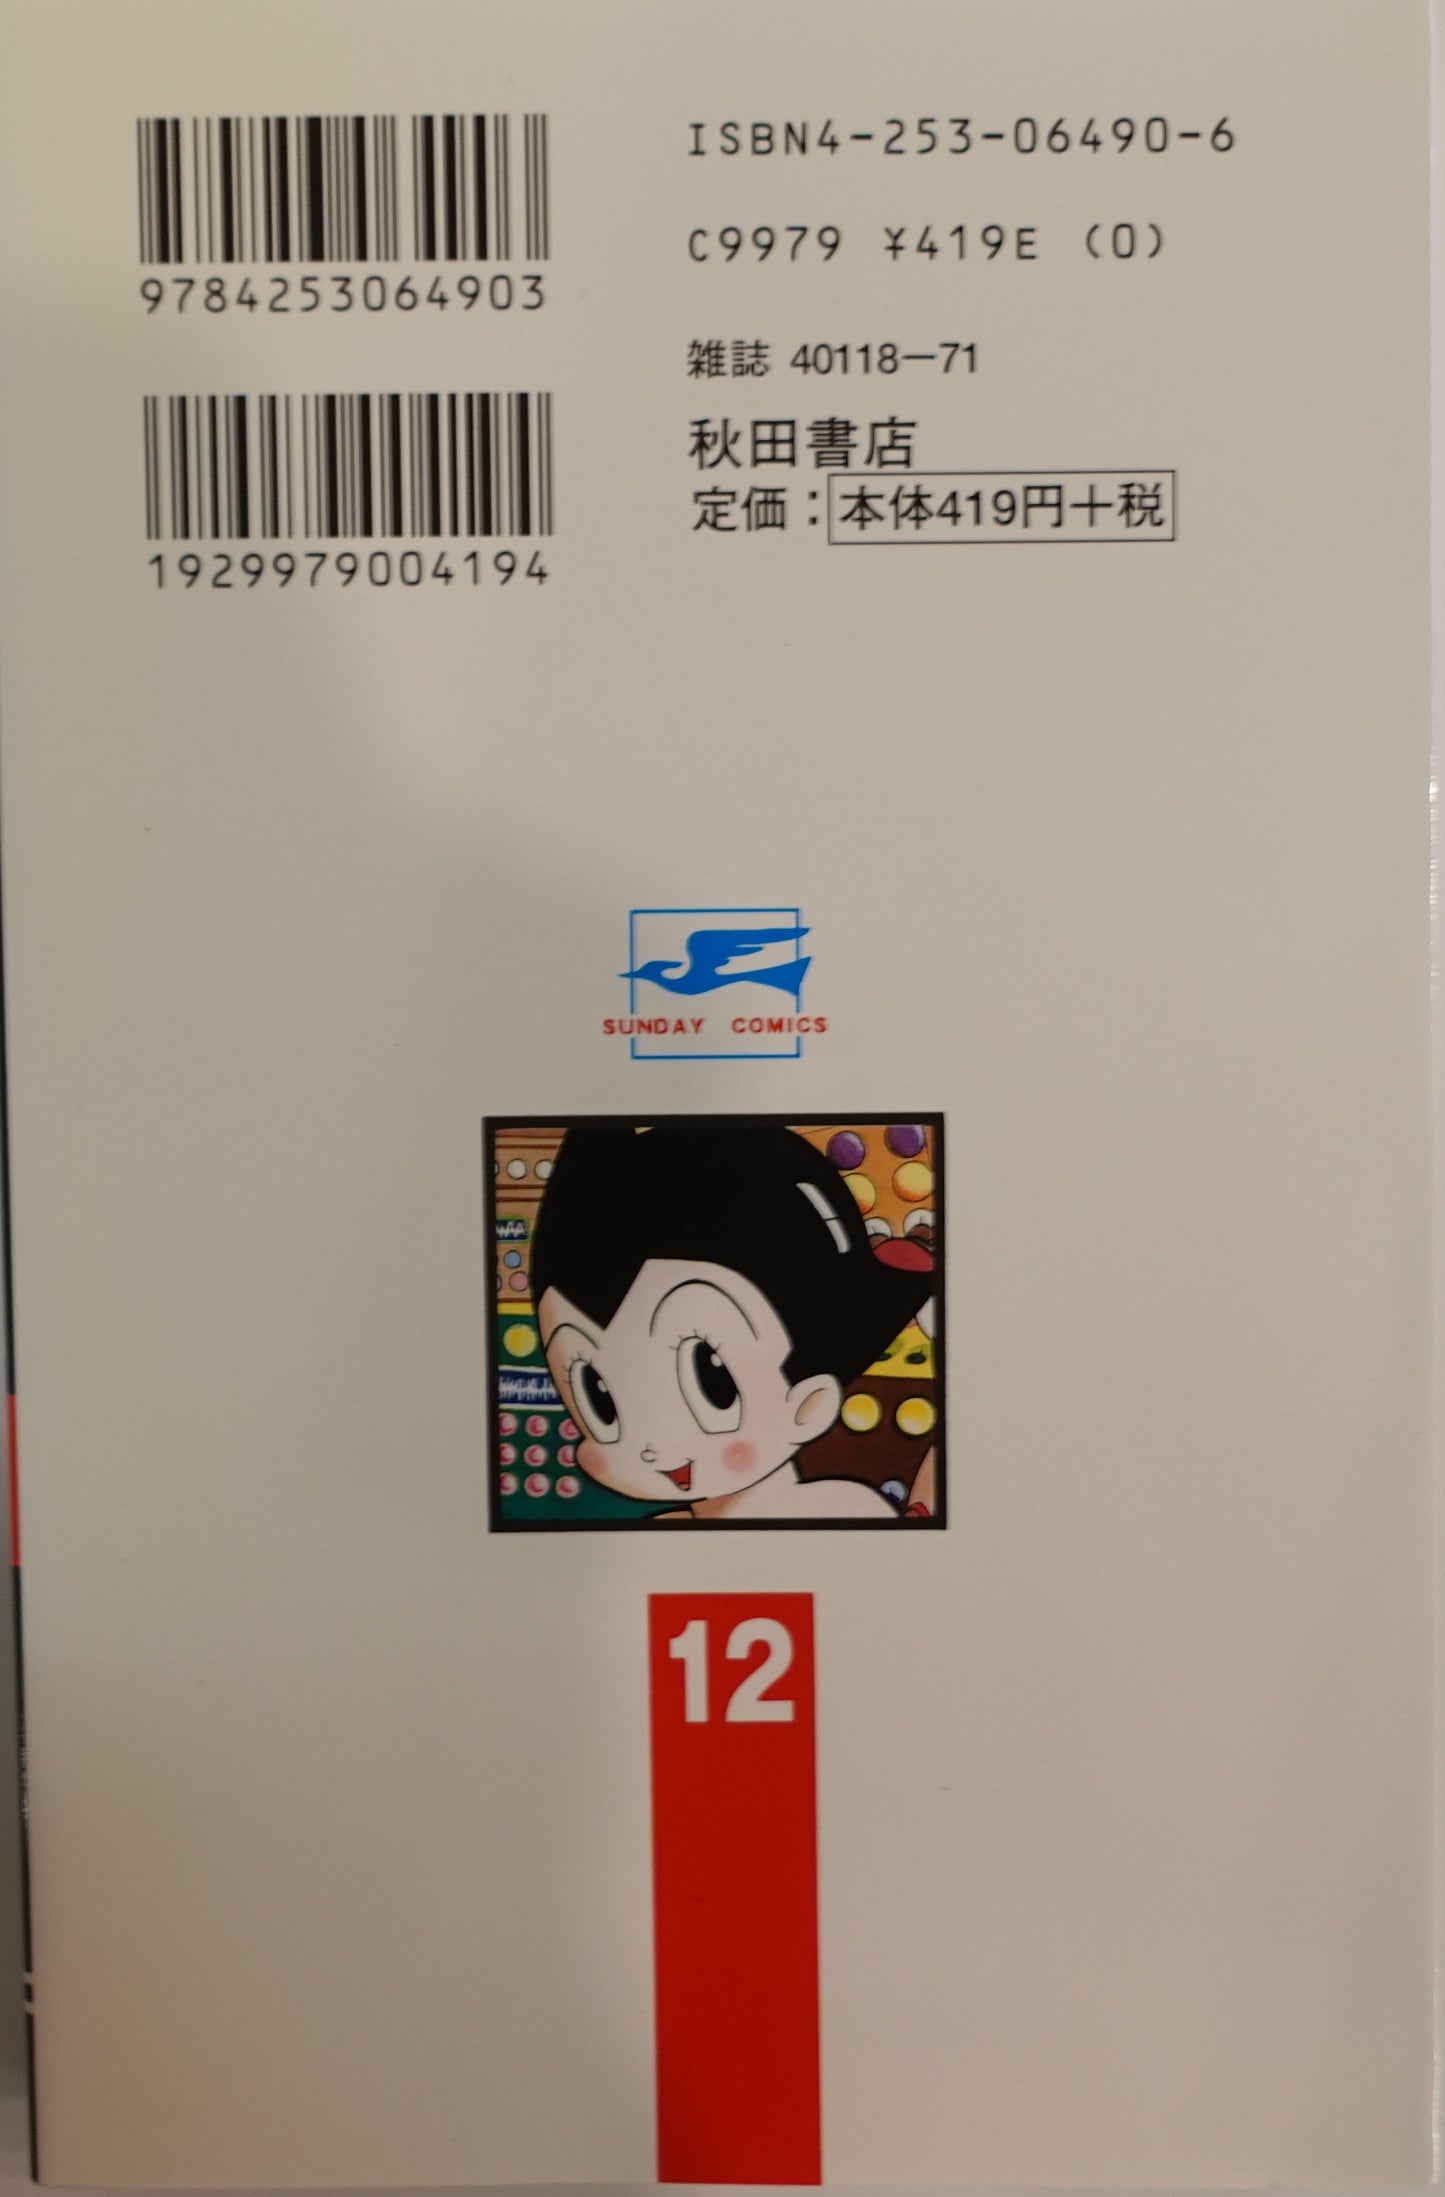 Mighty Atom-Astro Boy- Vol.12-official Japanese Edition